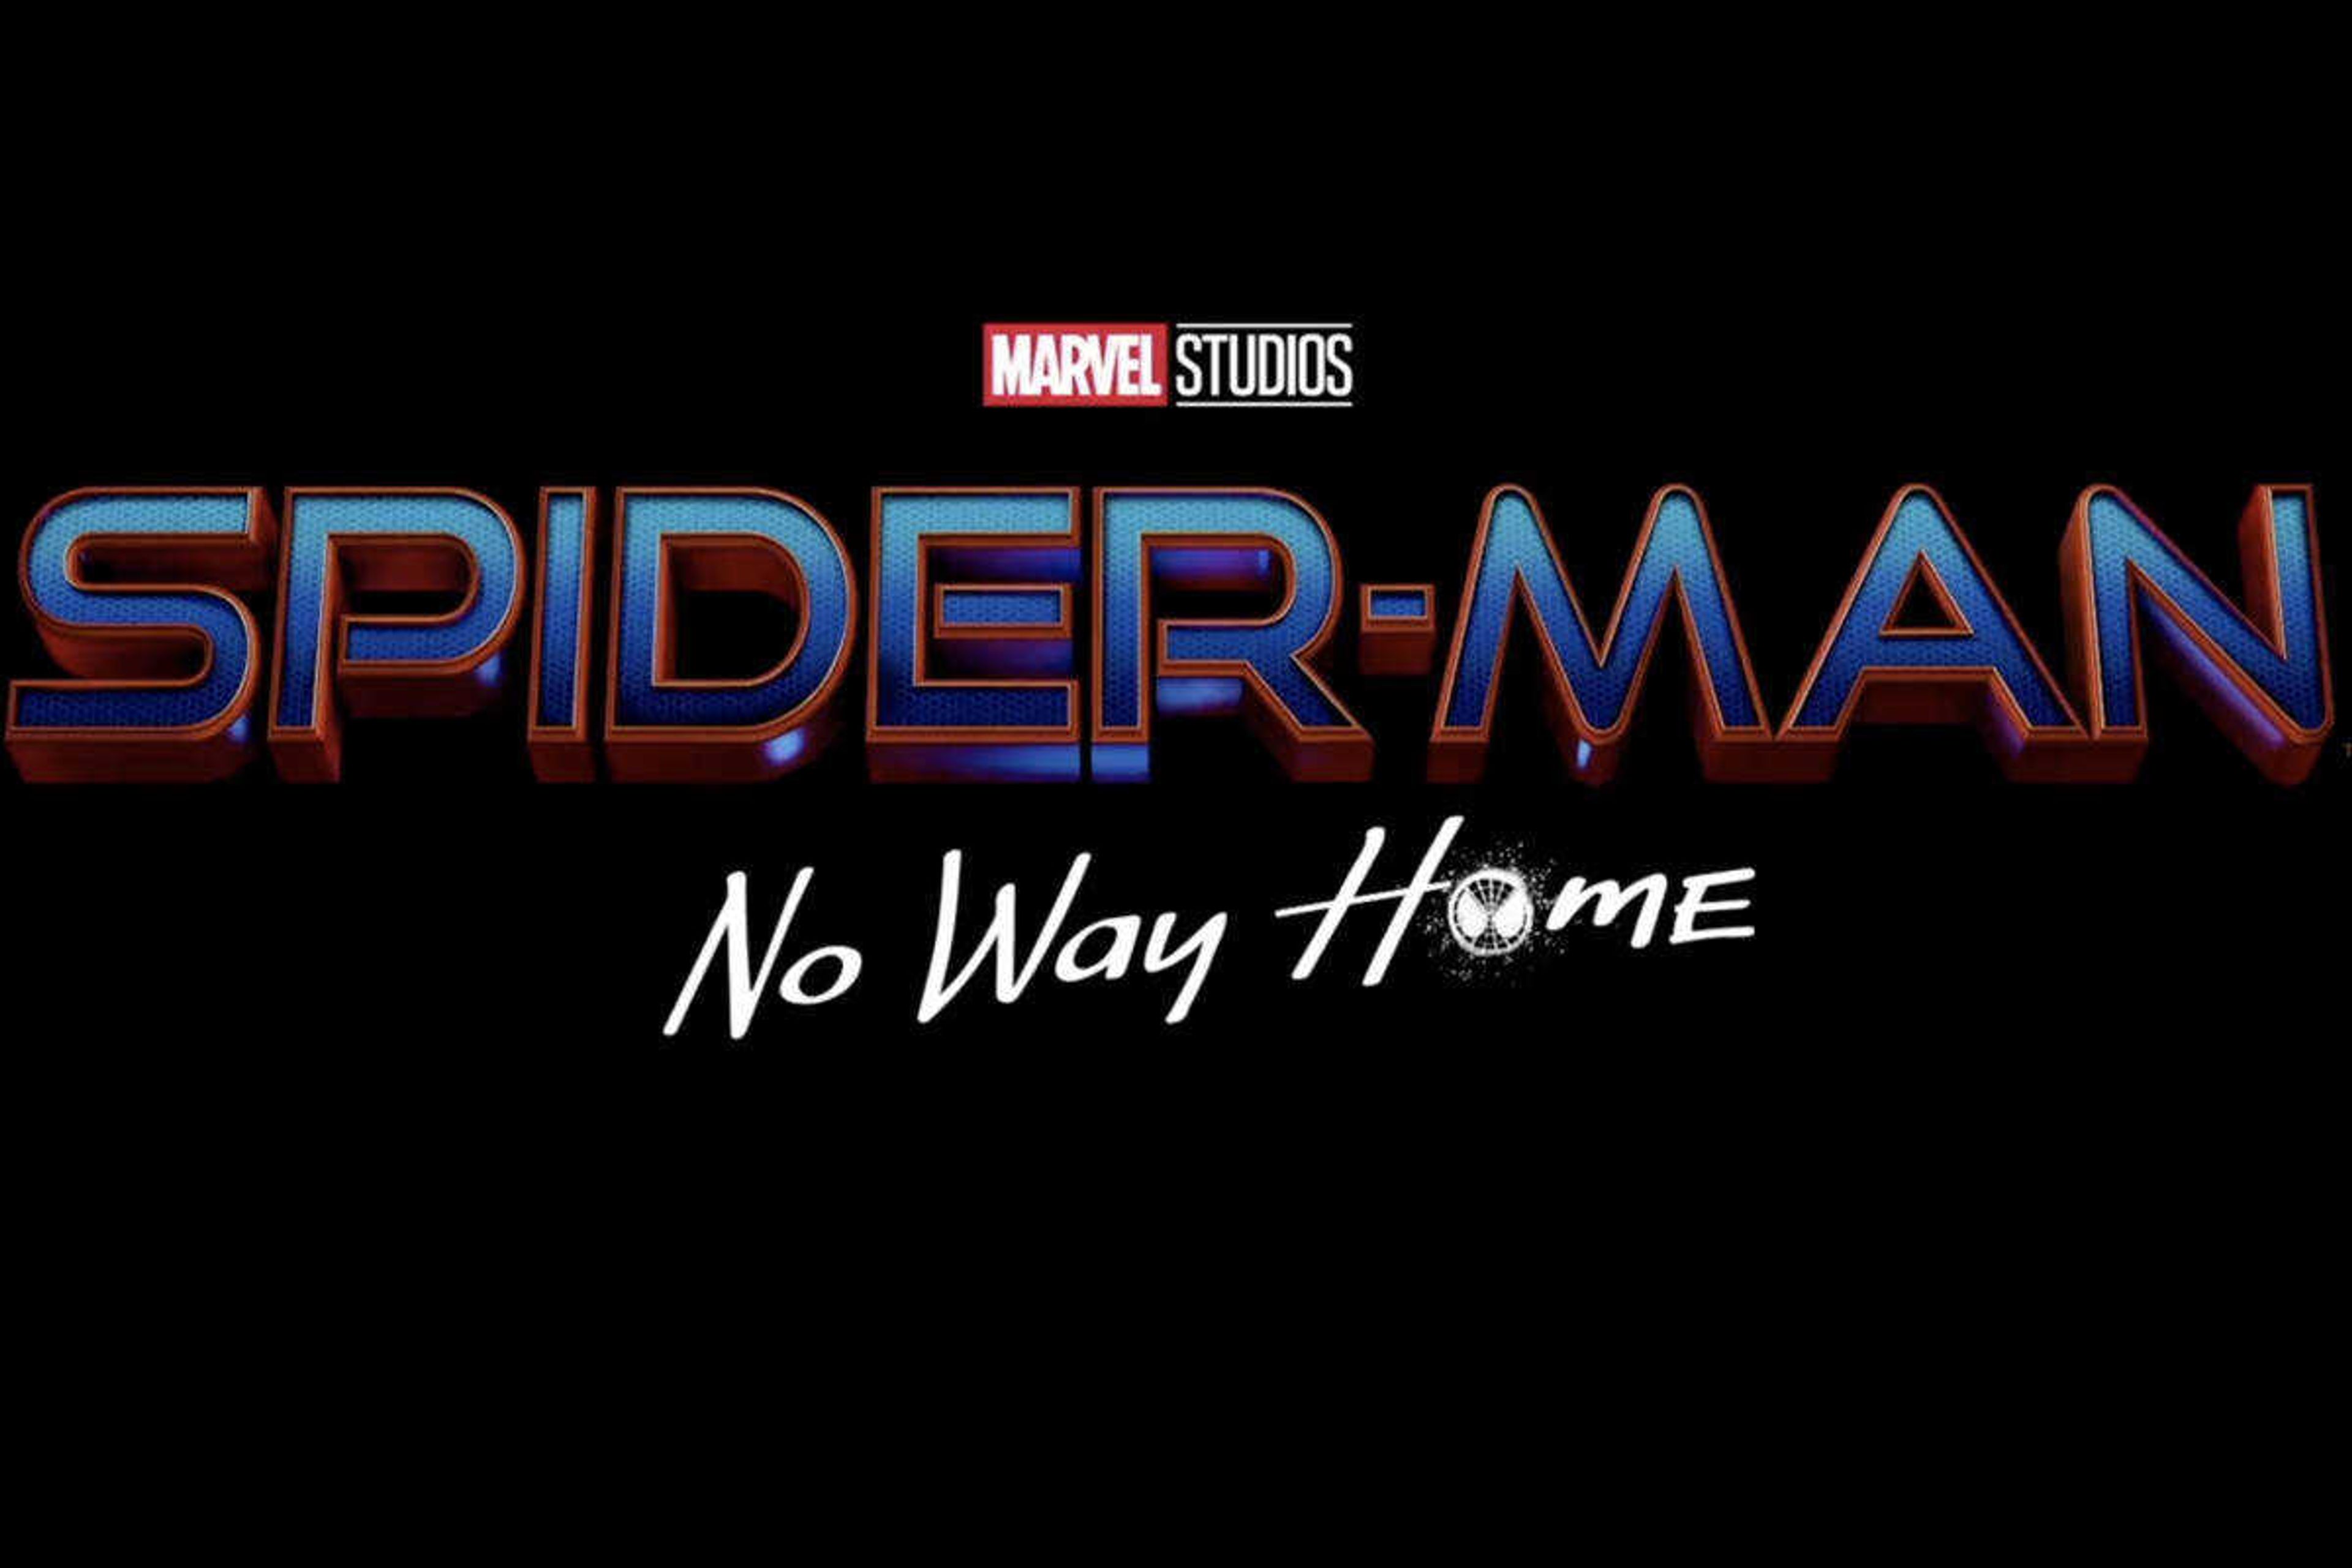 Title card for the upcoming Spider-Man movie "No Way Home." The movie is expected to be in theaters December 2021.